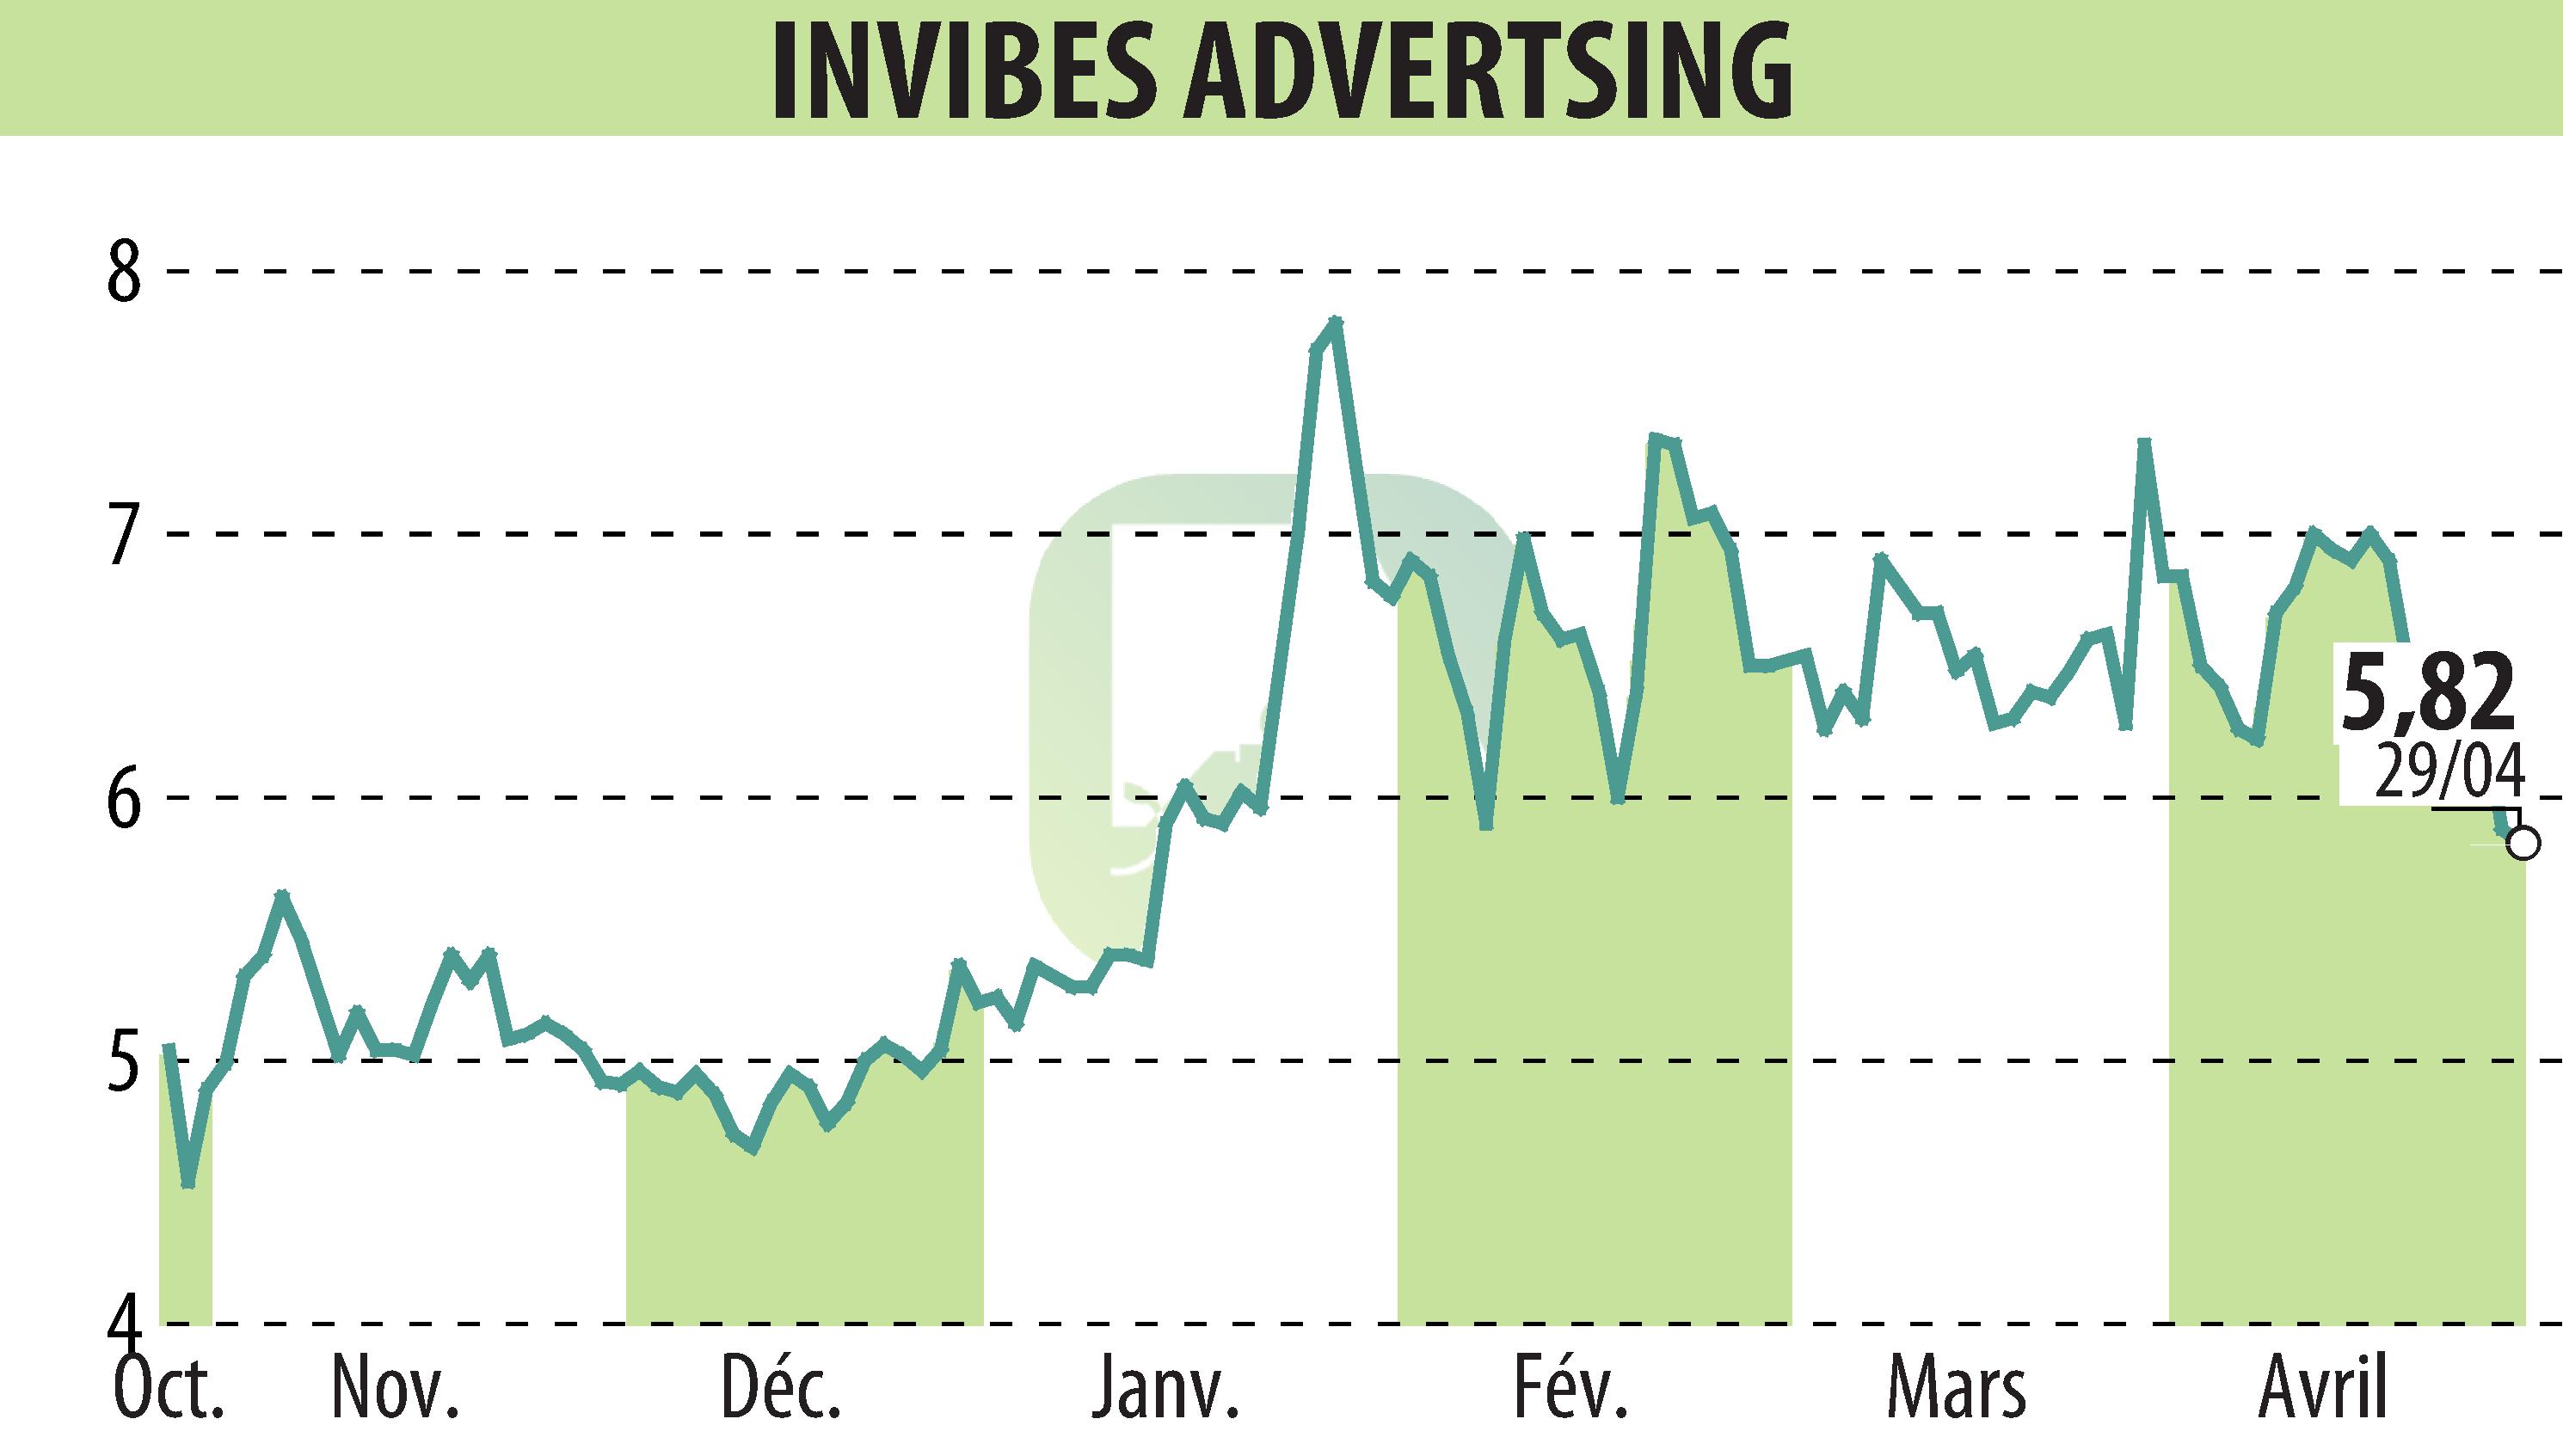 Stock price chart of INVIBES ADVERTSING (EPA:ALINV) showing fluctuations.